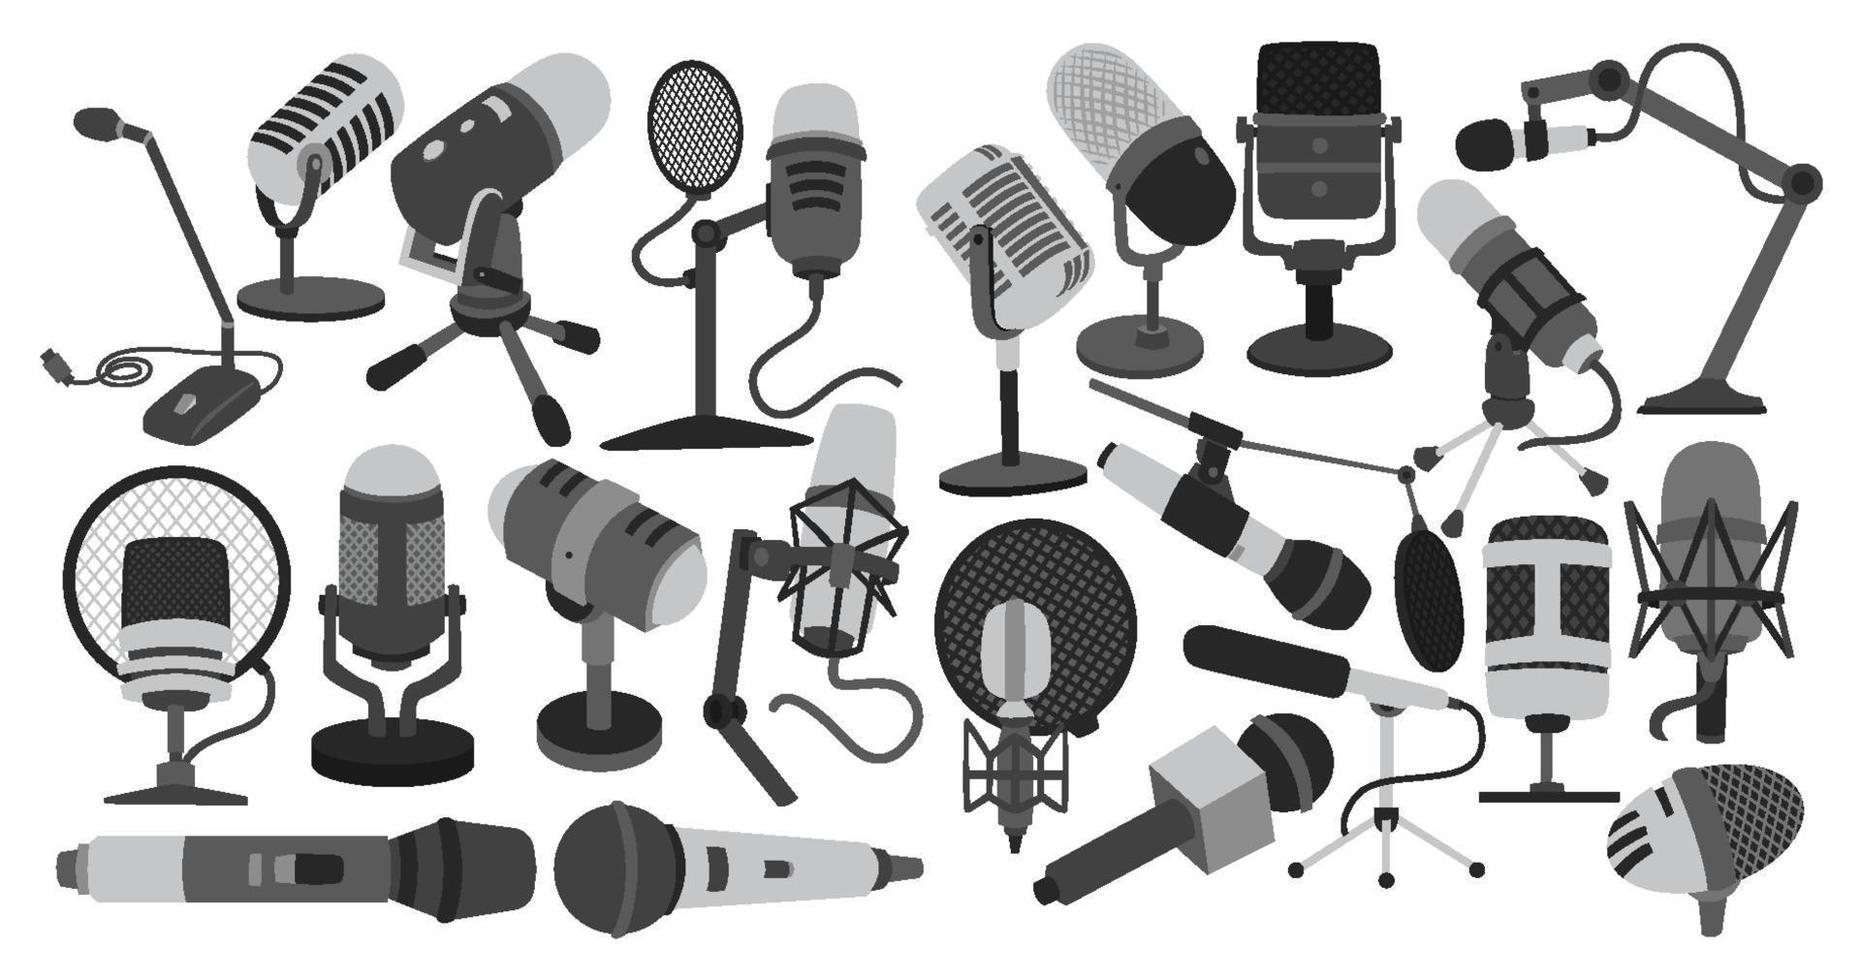 Retro Vintage Set of Podcast Equipments or tools Elements, groovy bundle. Vintage Objects Sticker Label in 70s, 80s, 90s style. Flat illustration with microphones, mixer, headphone and speaker vector